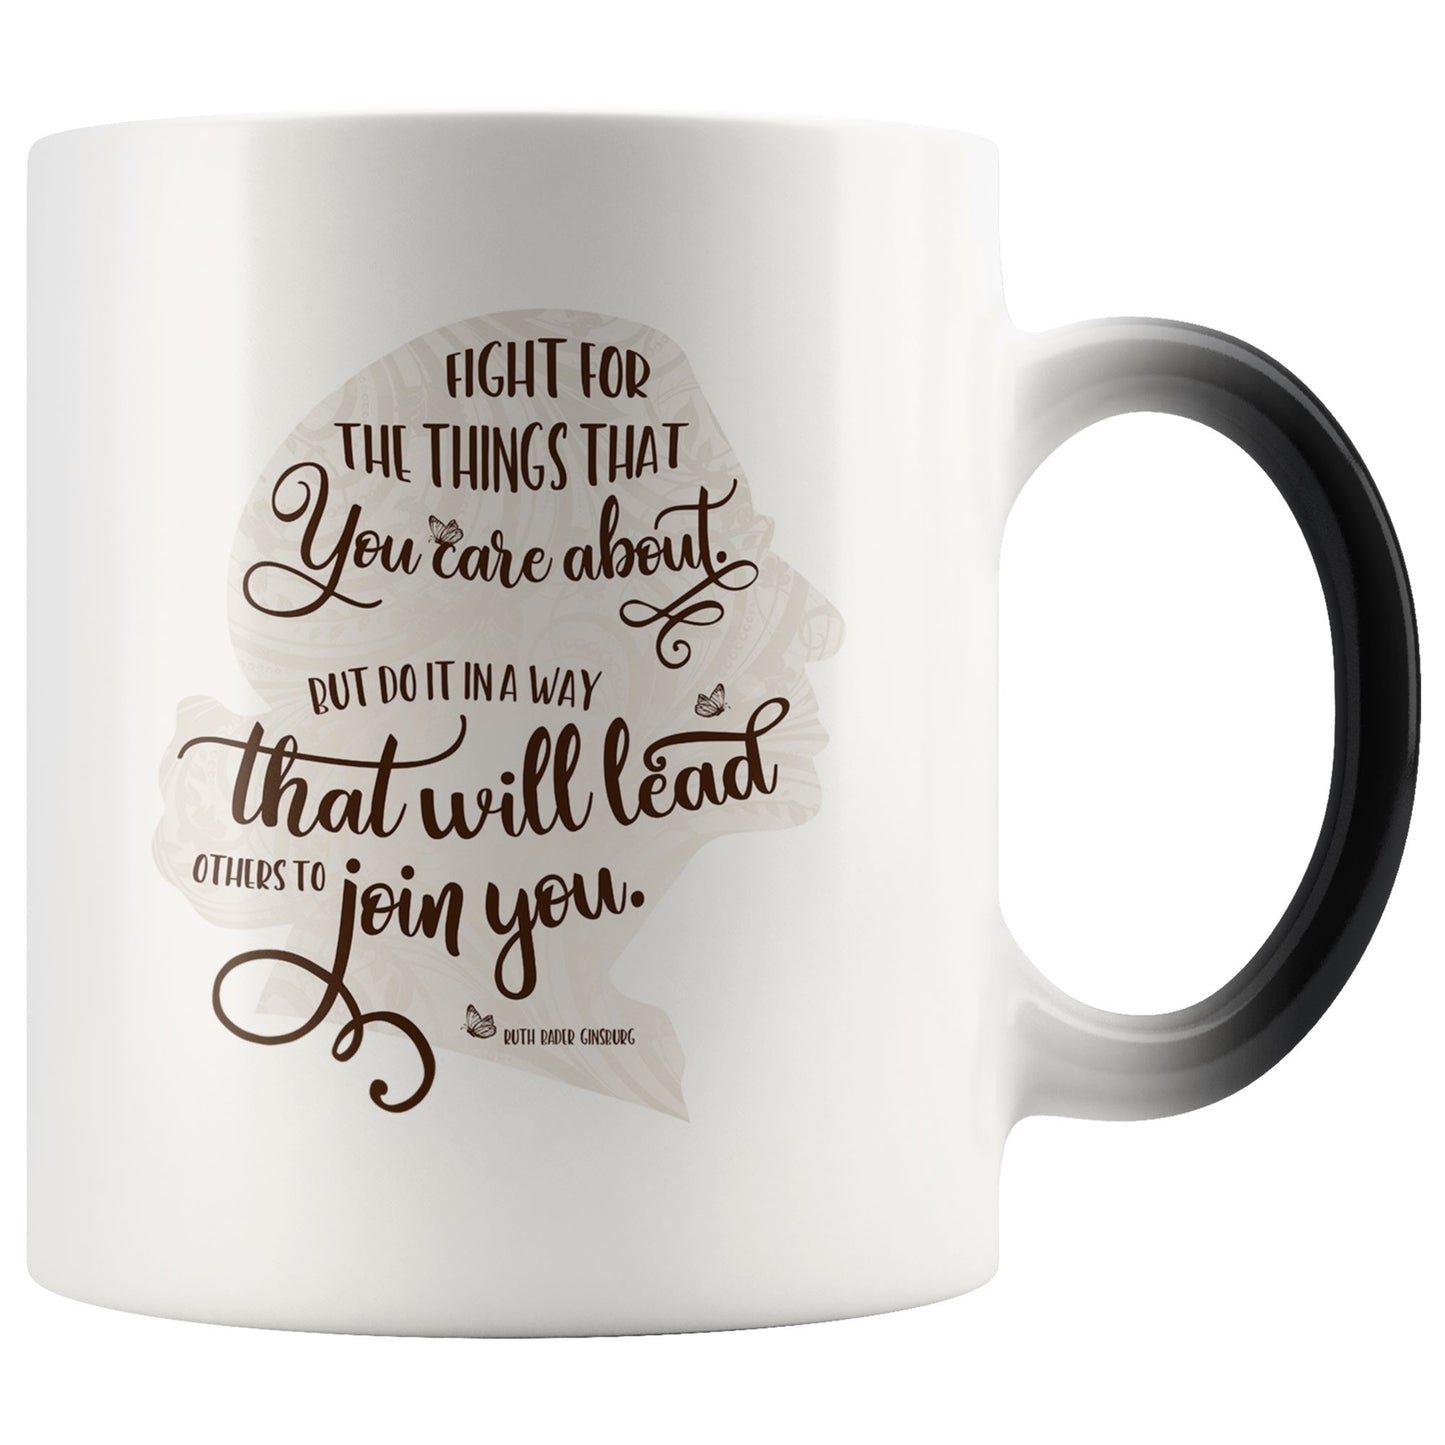 RBG Mug • Fight for the Things You Care About Color Changing Coffe Mug 110oz. Drinkware teelaunch Brown Silo 